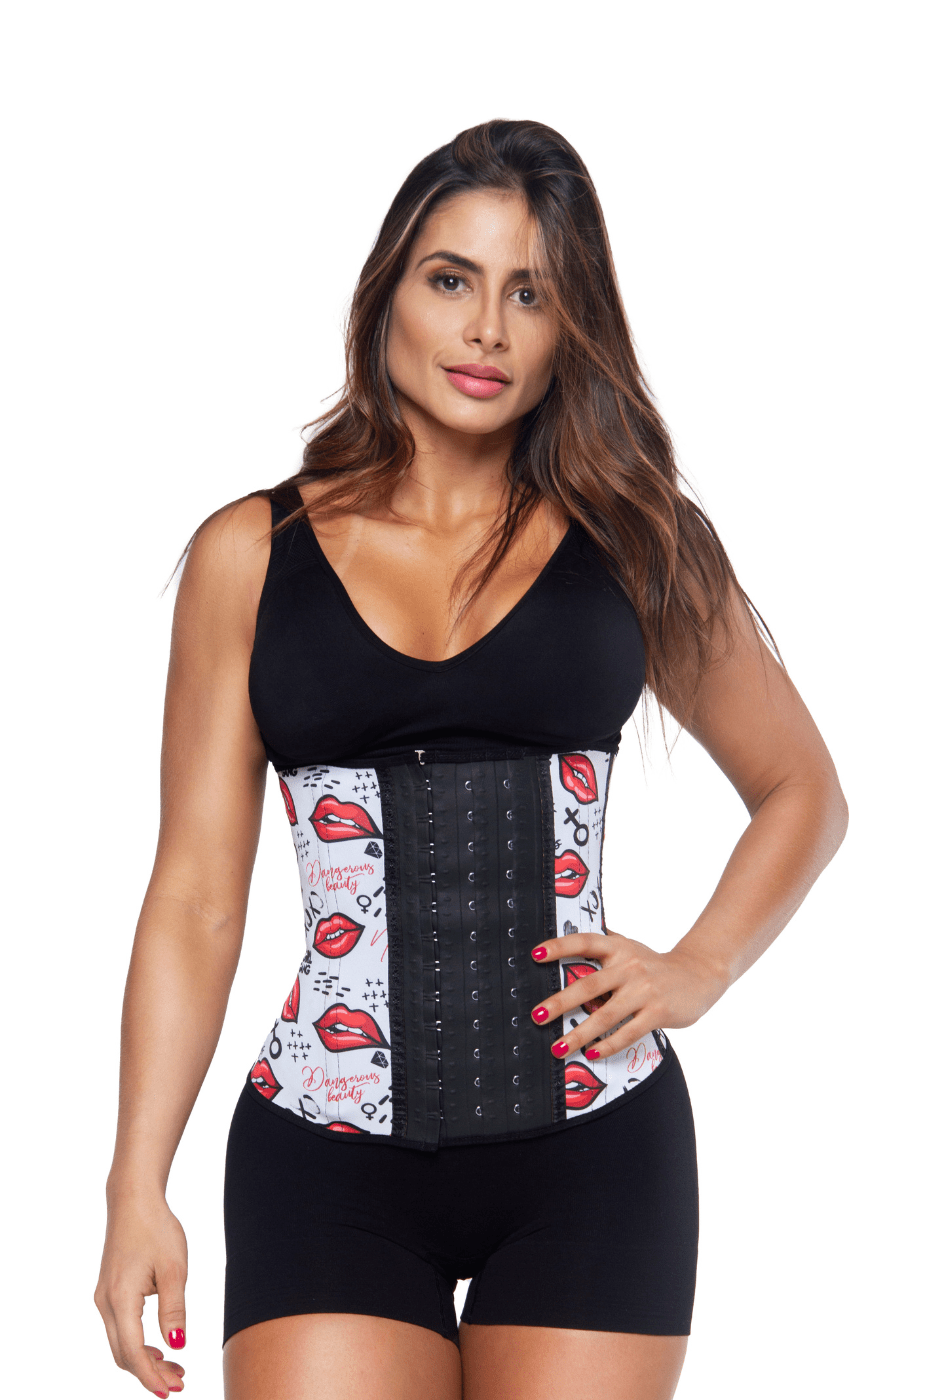 Waist Trainers for sale in Munich, Germany